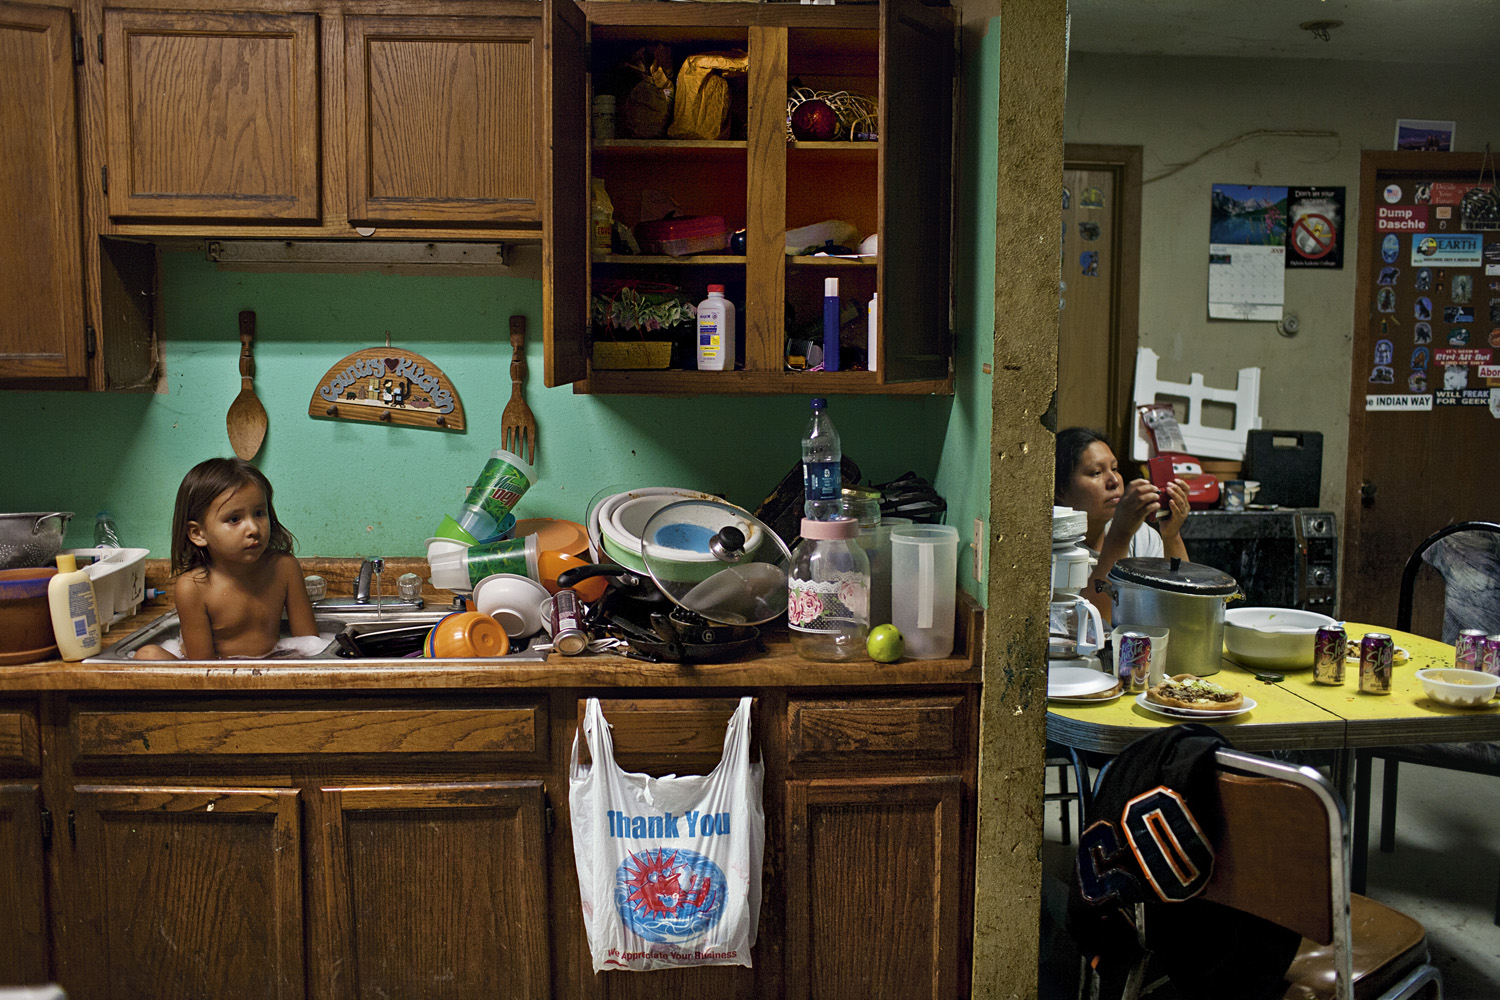 Three-year-old C. J. Shot bathes among dishes. The Oglala concept of tiospaye, the unity of the extended family, means that homes are often overcrowded, especially with the severe housing shortage on the reservation. In 2008, when this photograph was made, 22 people lived in the three-bedroom house.  These houses aren't who we are,  says Oglala activist Alex White Plume.